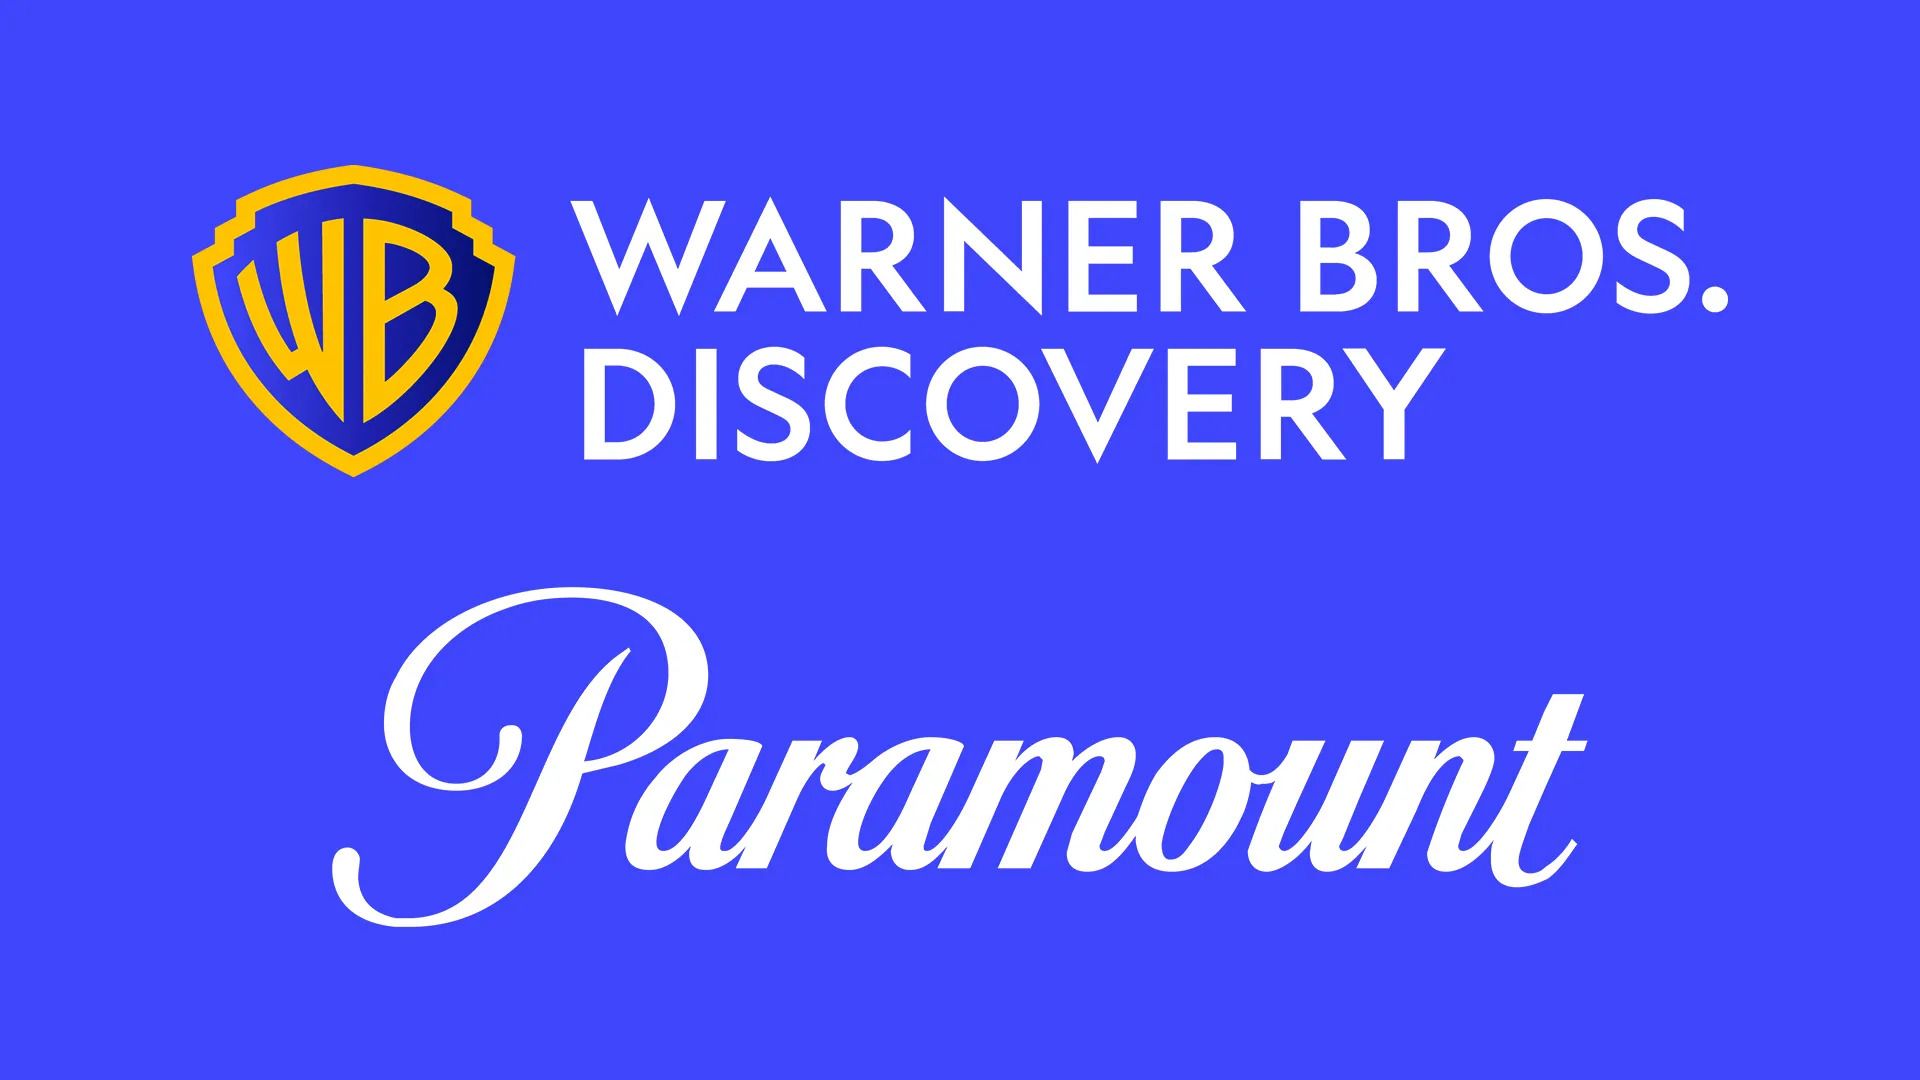 The logo for Warner Bros. Discovery above the logo for Paramount